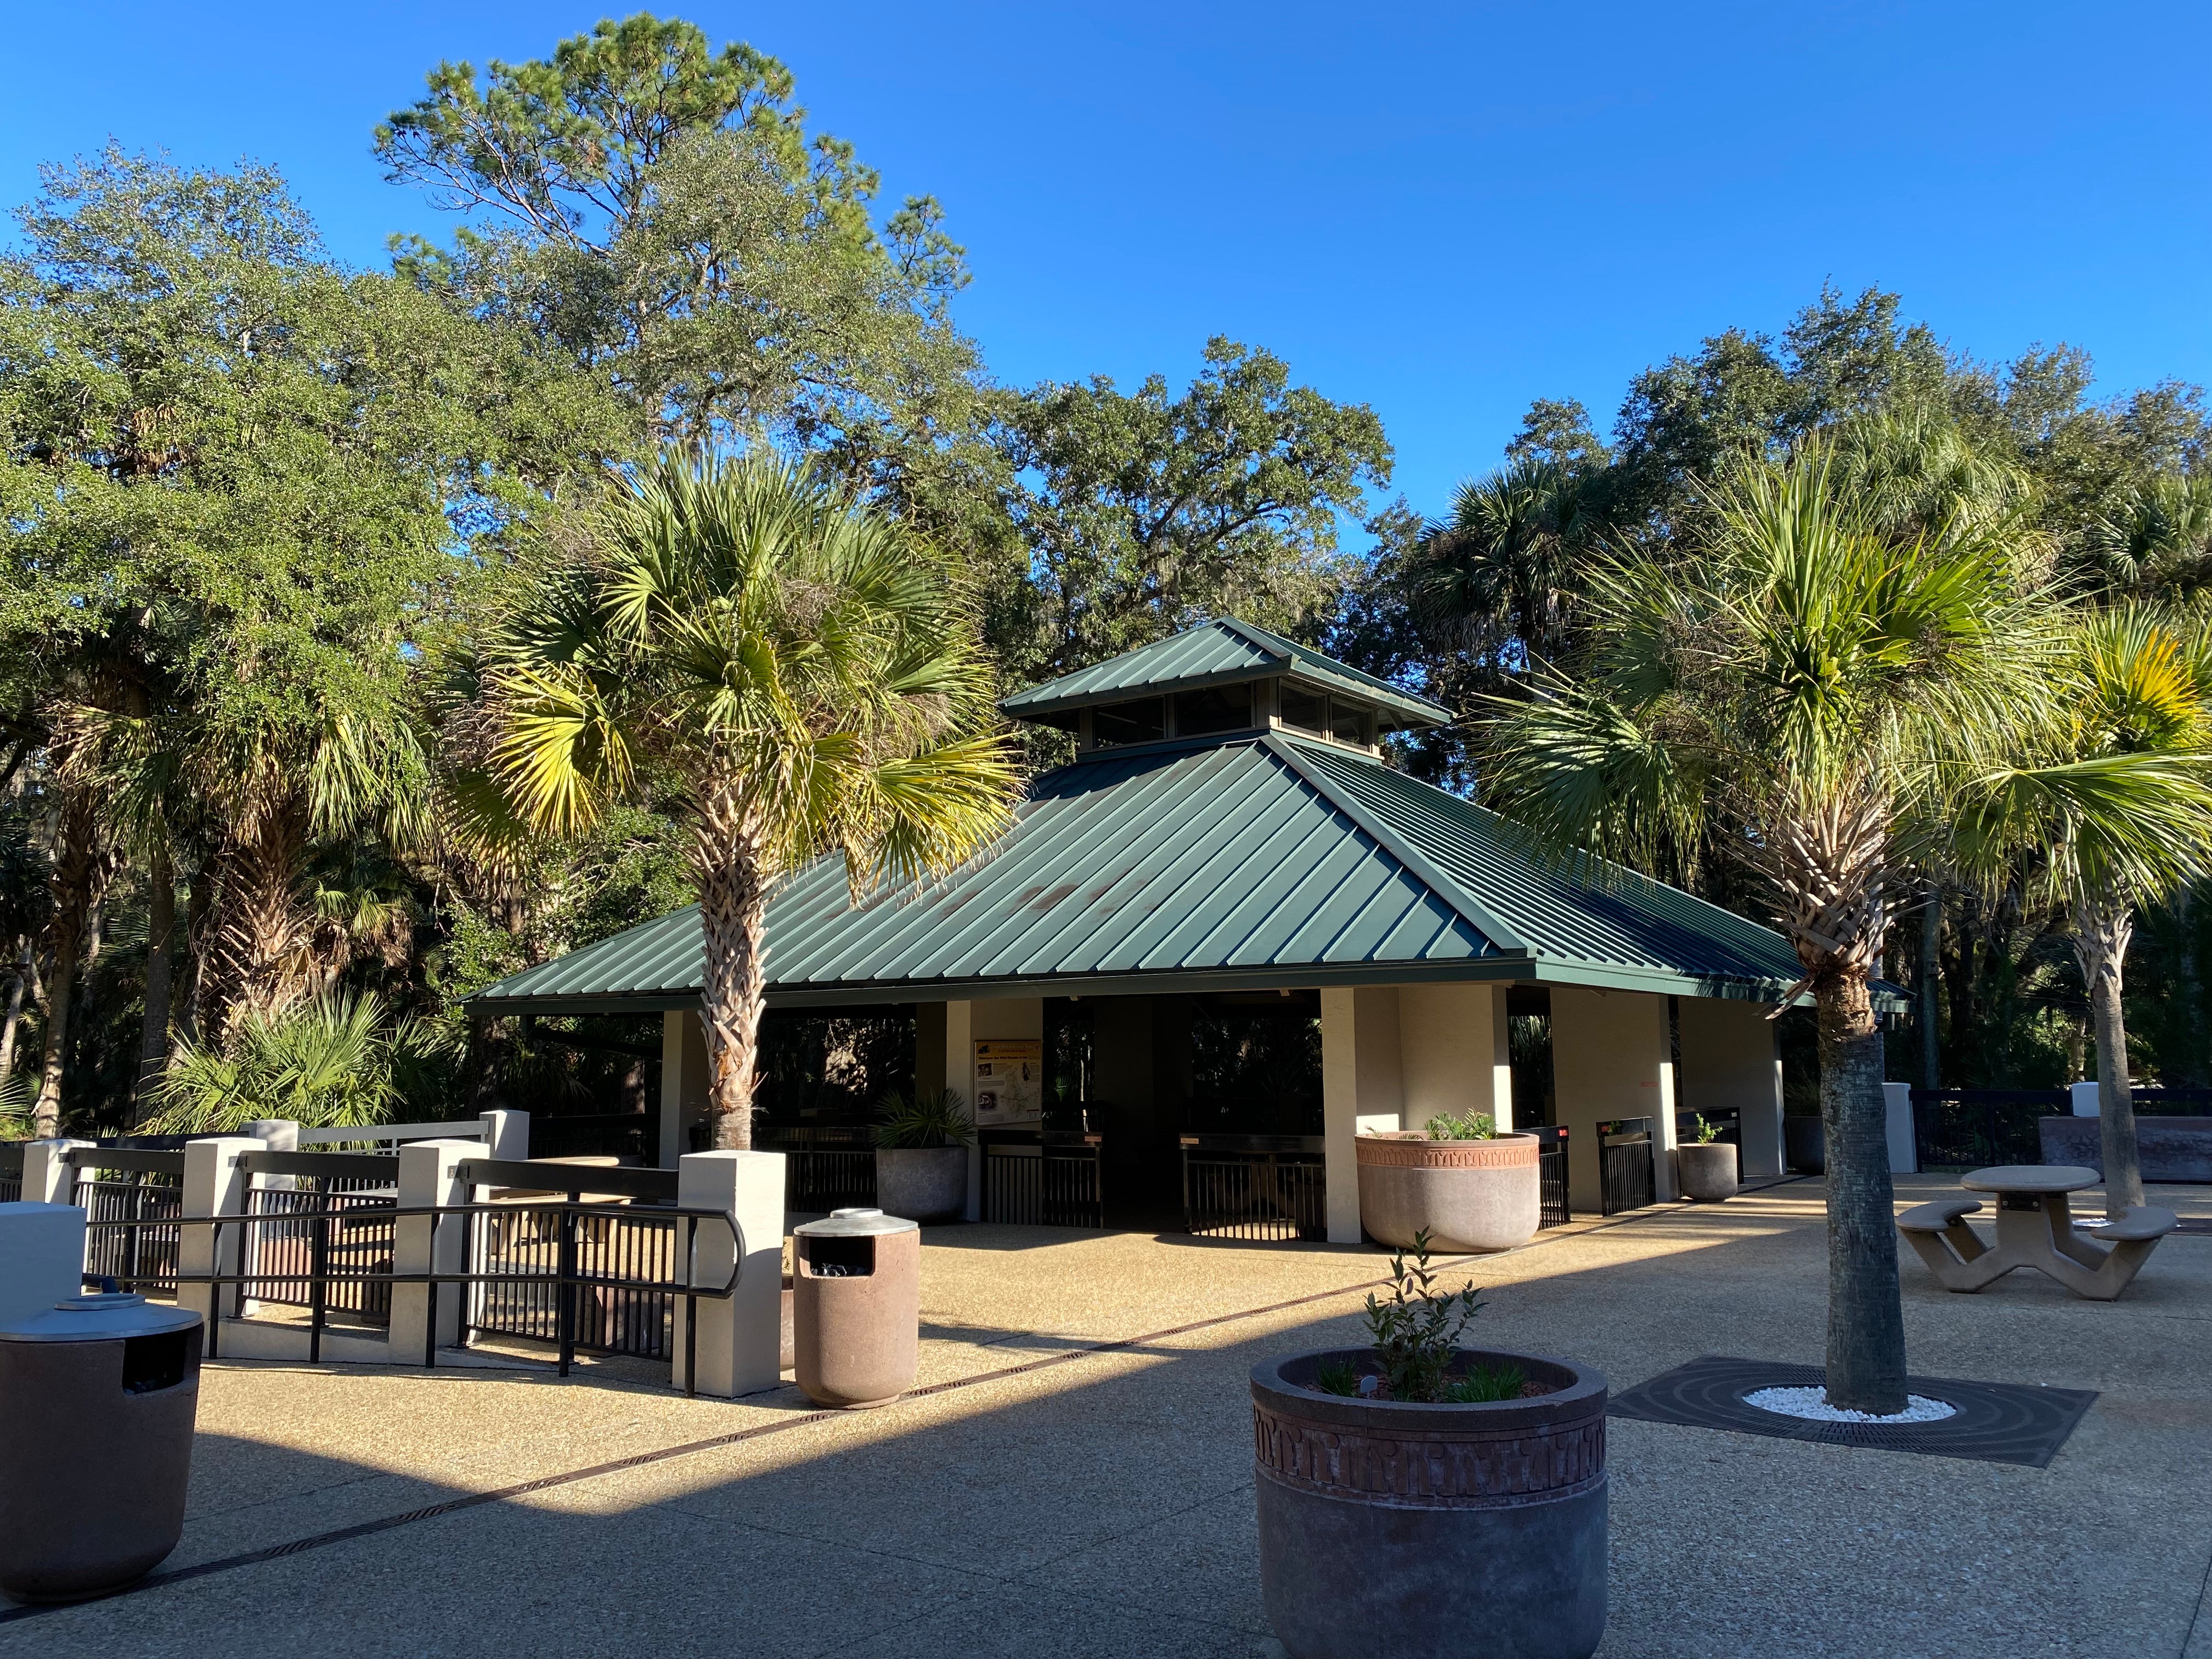 Camper submitted image from Juniper Springs Rec Area - Sandpine - 4